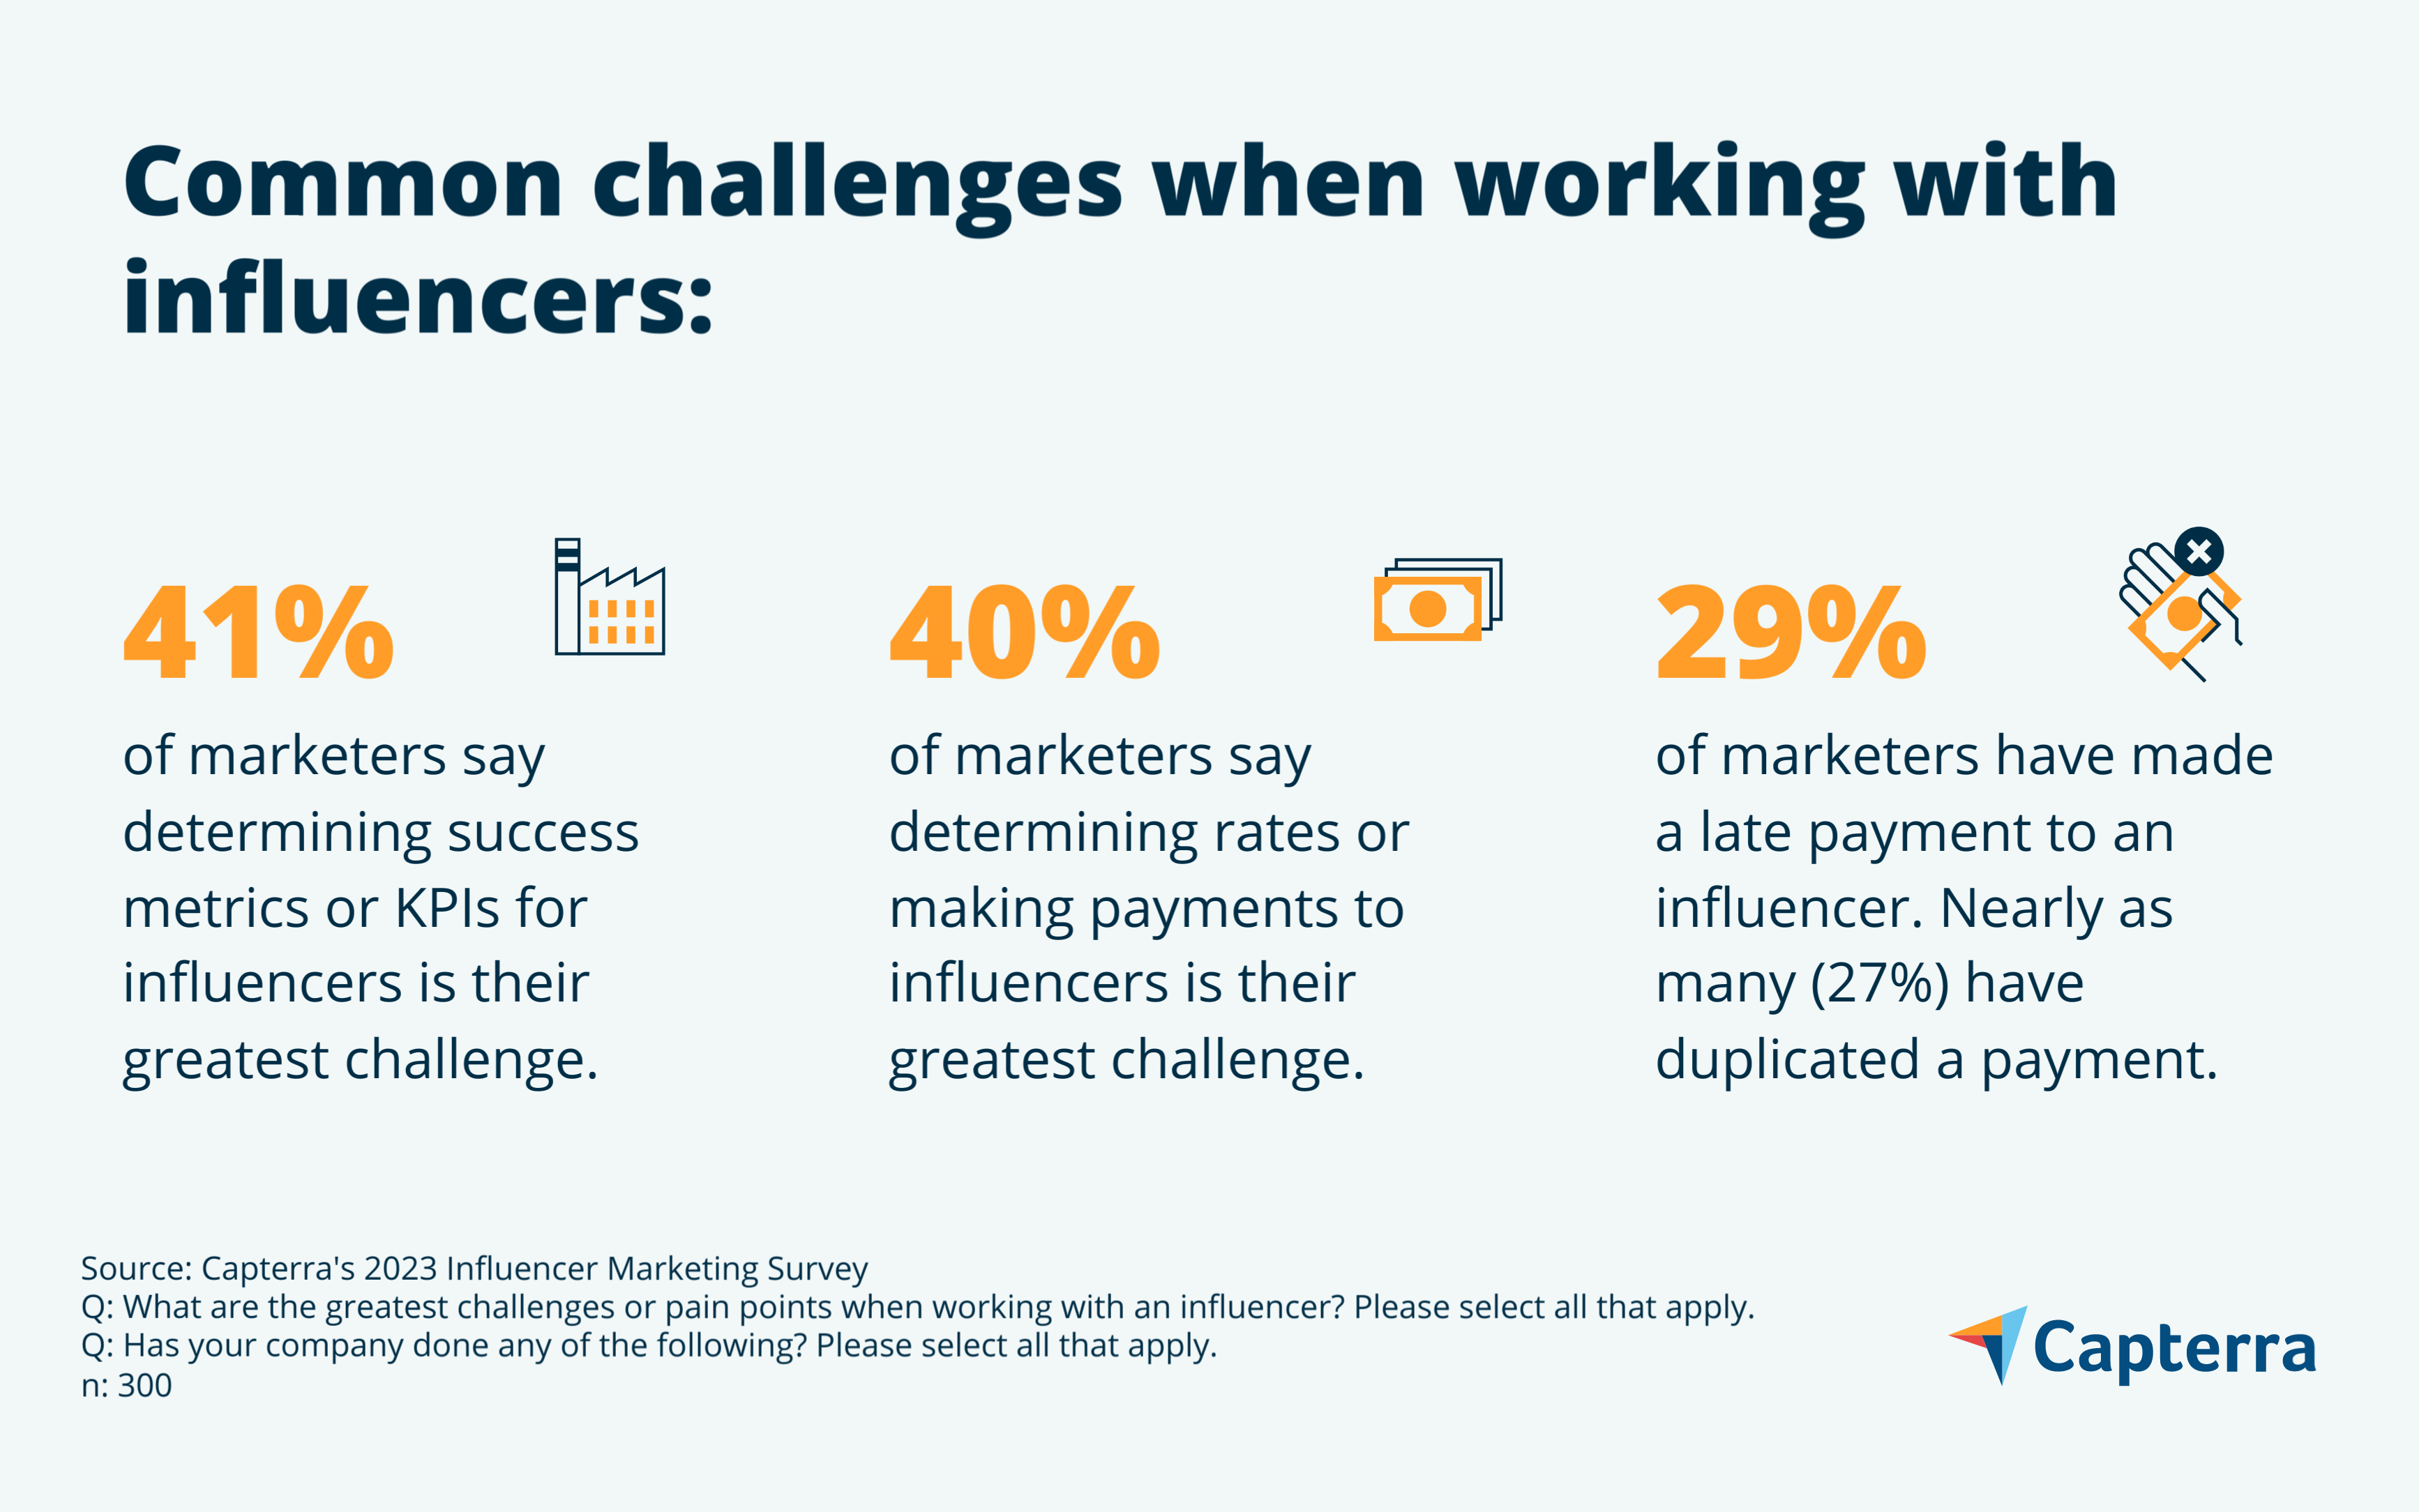 Common challenges graphic for the blog article "How to Navigate Influencer Payment Ambiguity"